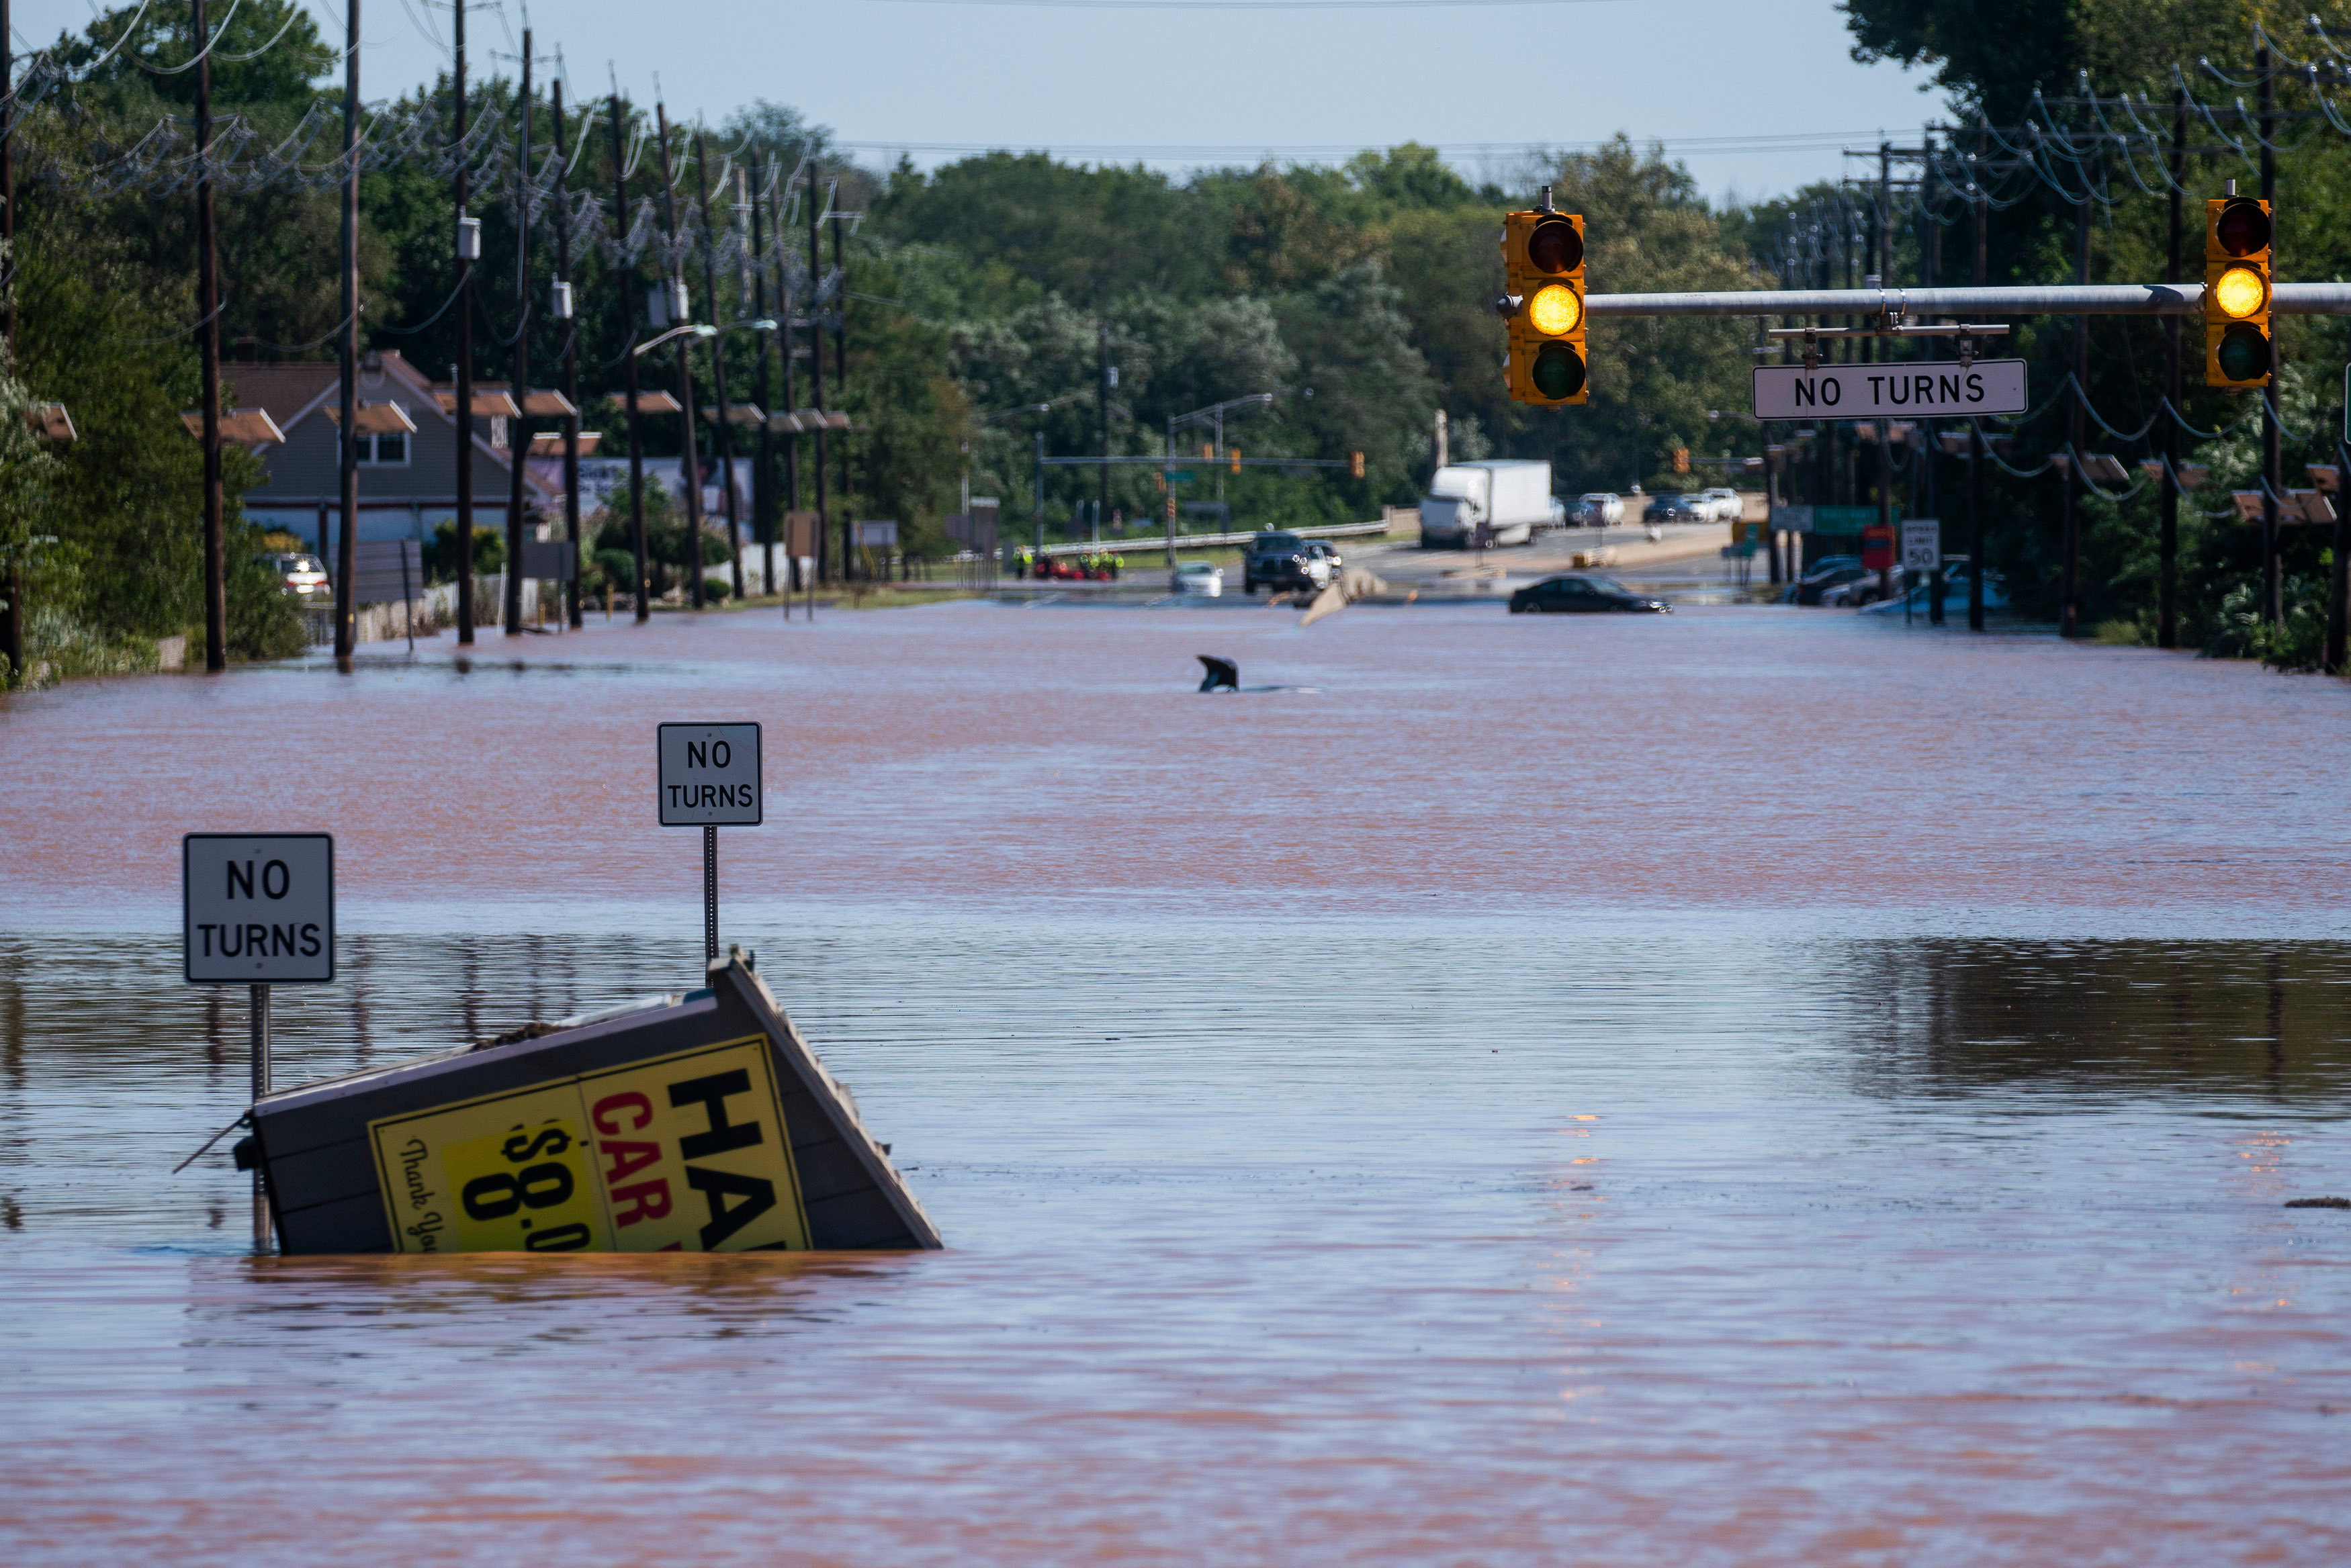 Route 206 stands partially flooded as a result of the remnants of Hurricane Ida in Somerville, New Jersey, on Thursday, September 2.